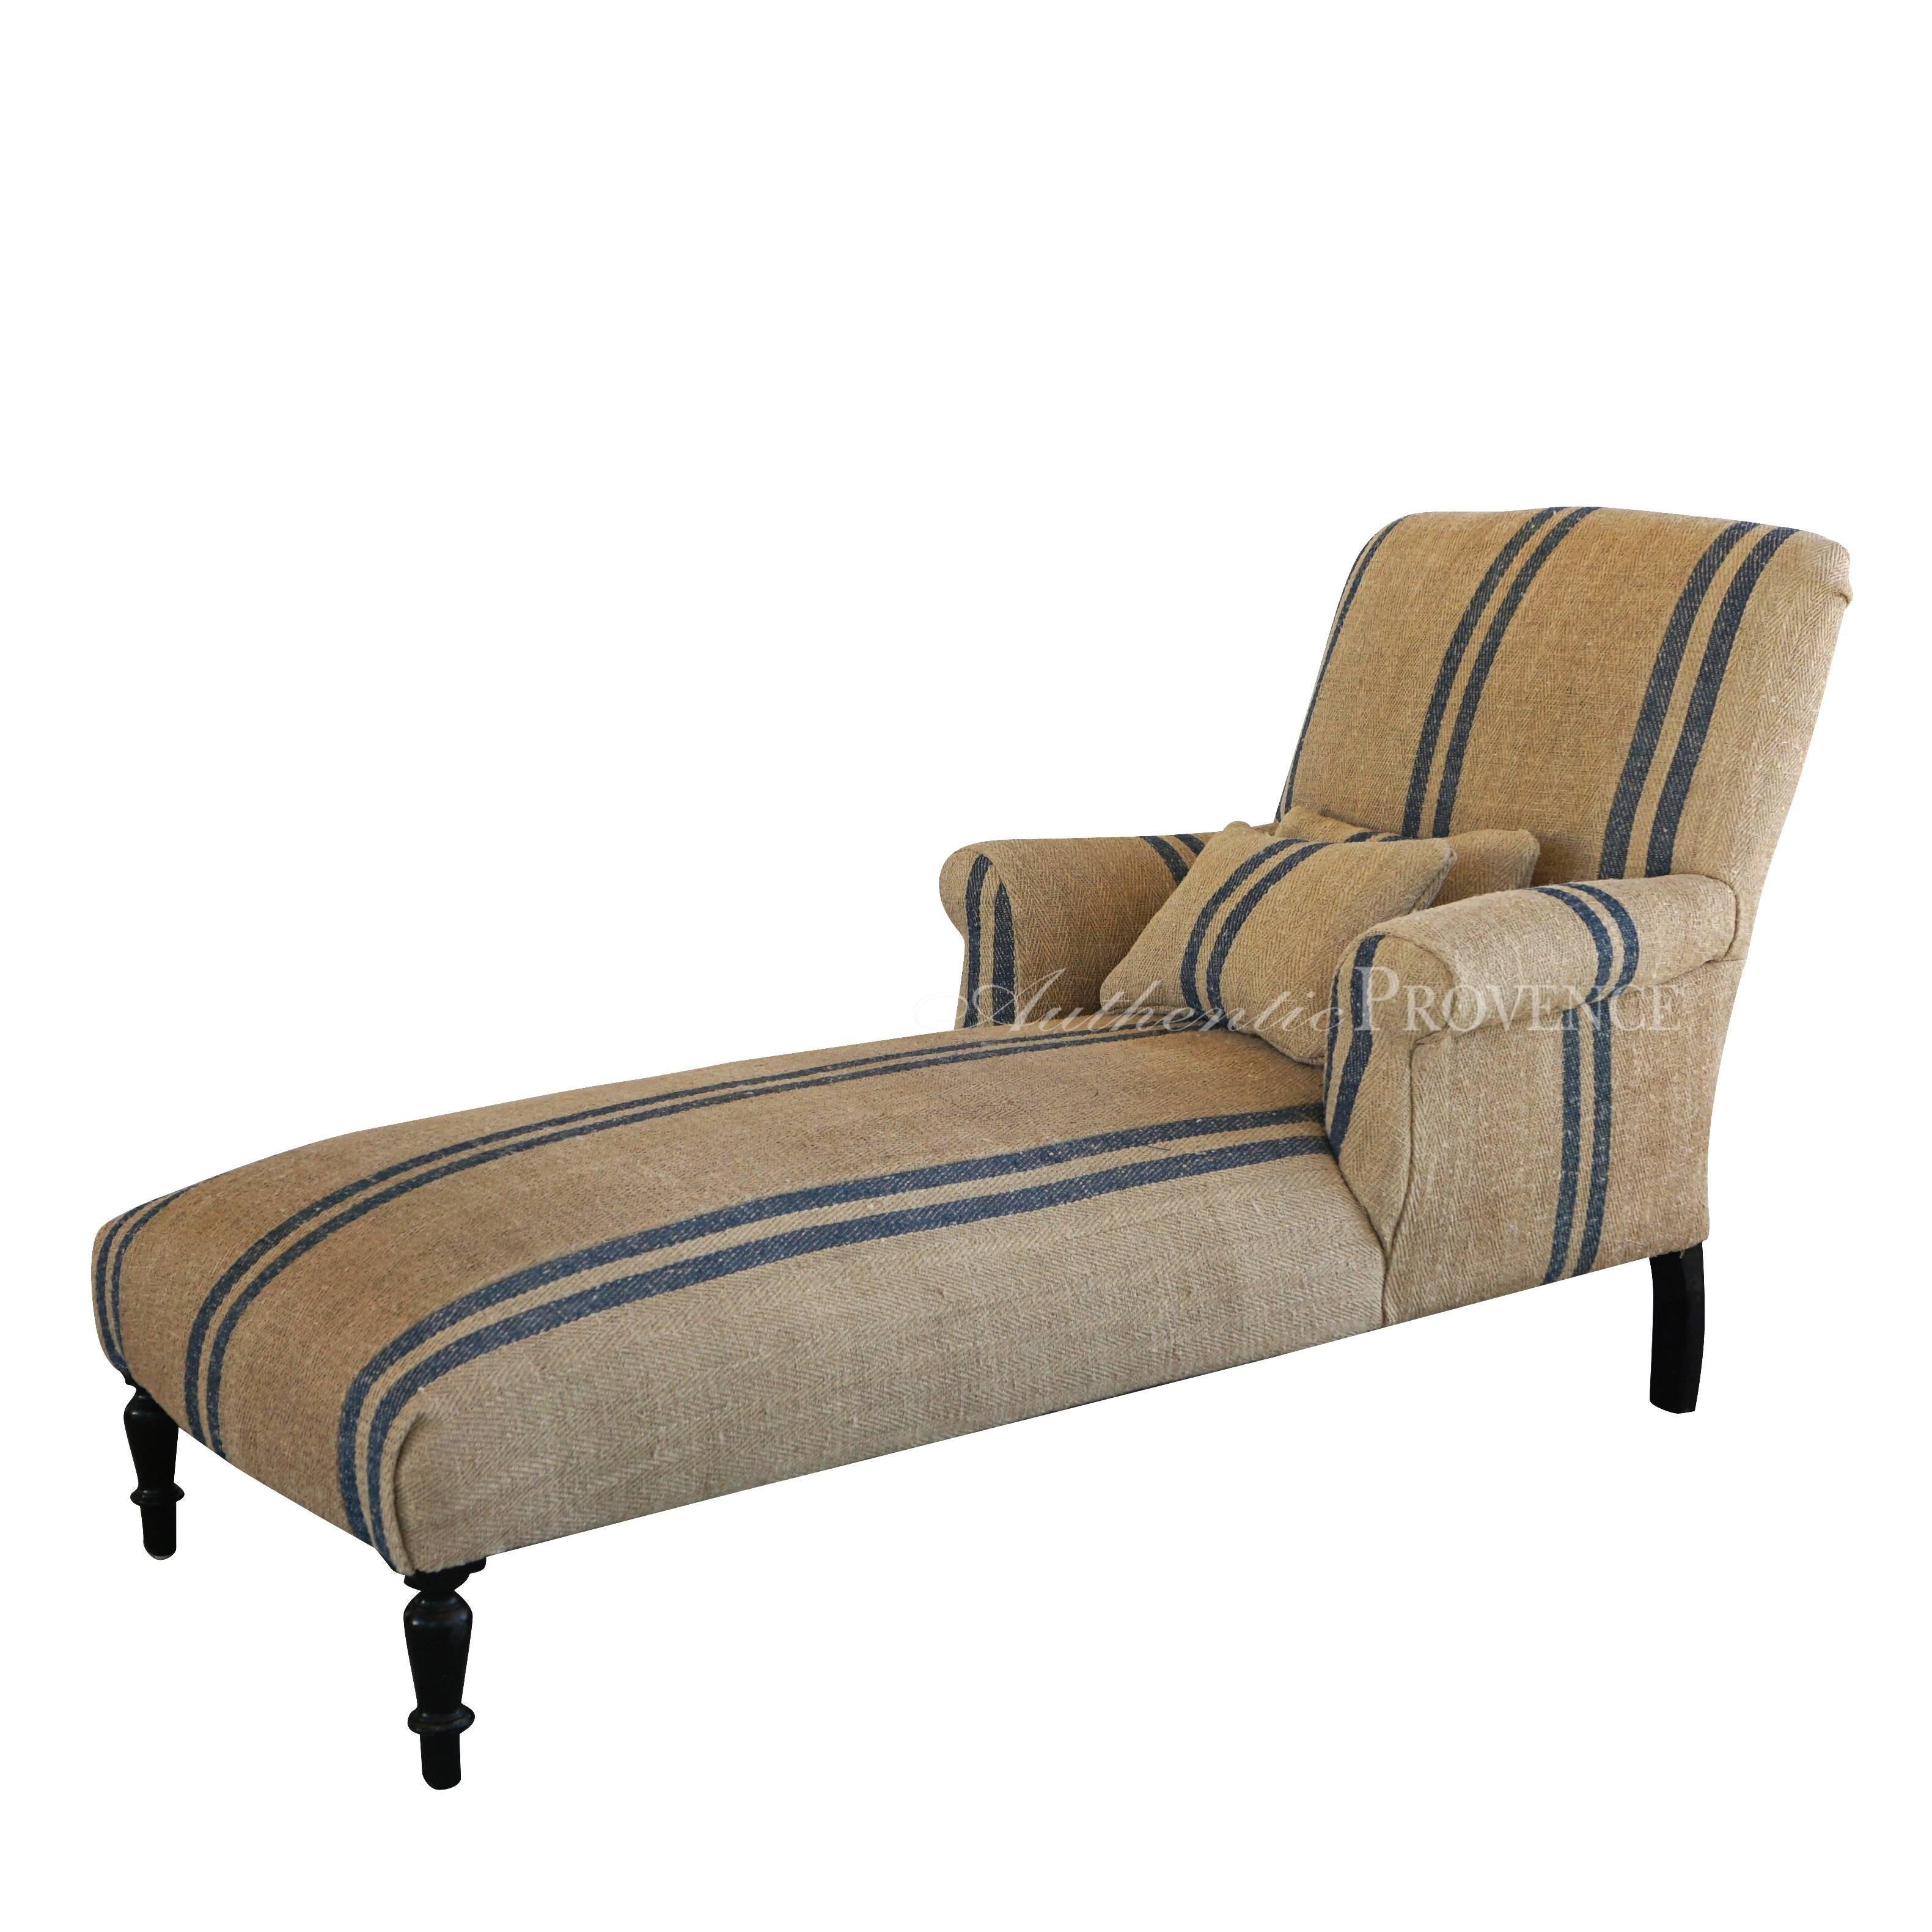 Mid-19th century, a Meridienne French sofa or chaise longue, Napoleon III period newly upholstered and recovered with antique double blue stripe hemp sack. and small rectangular pillow. Prov. France, circa 1860.